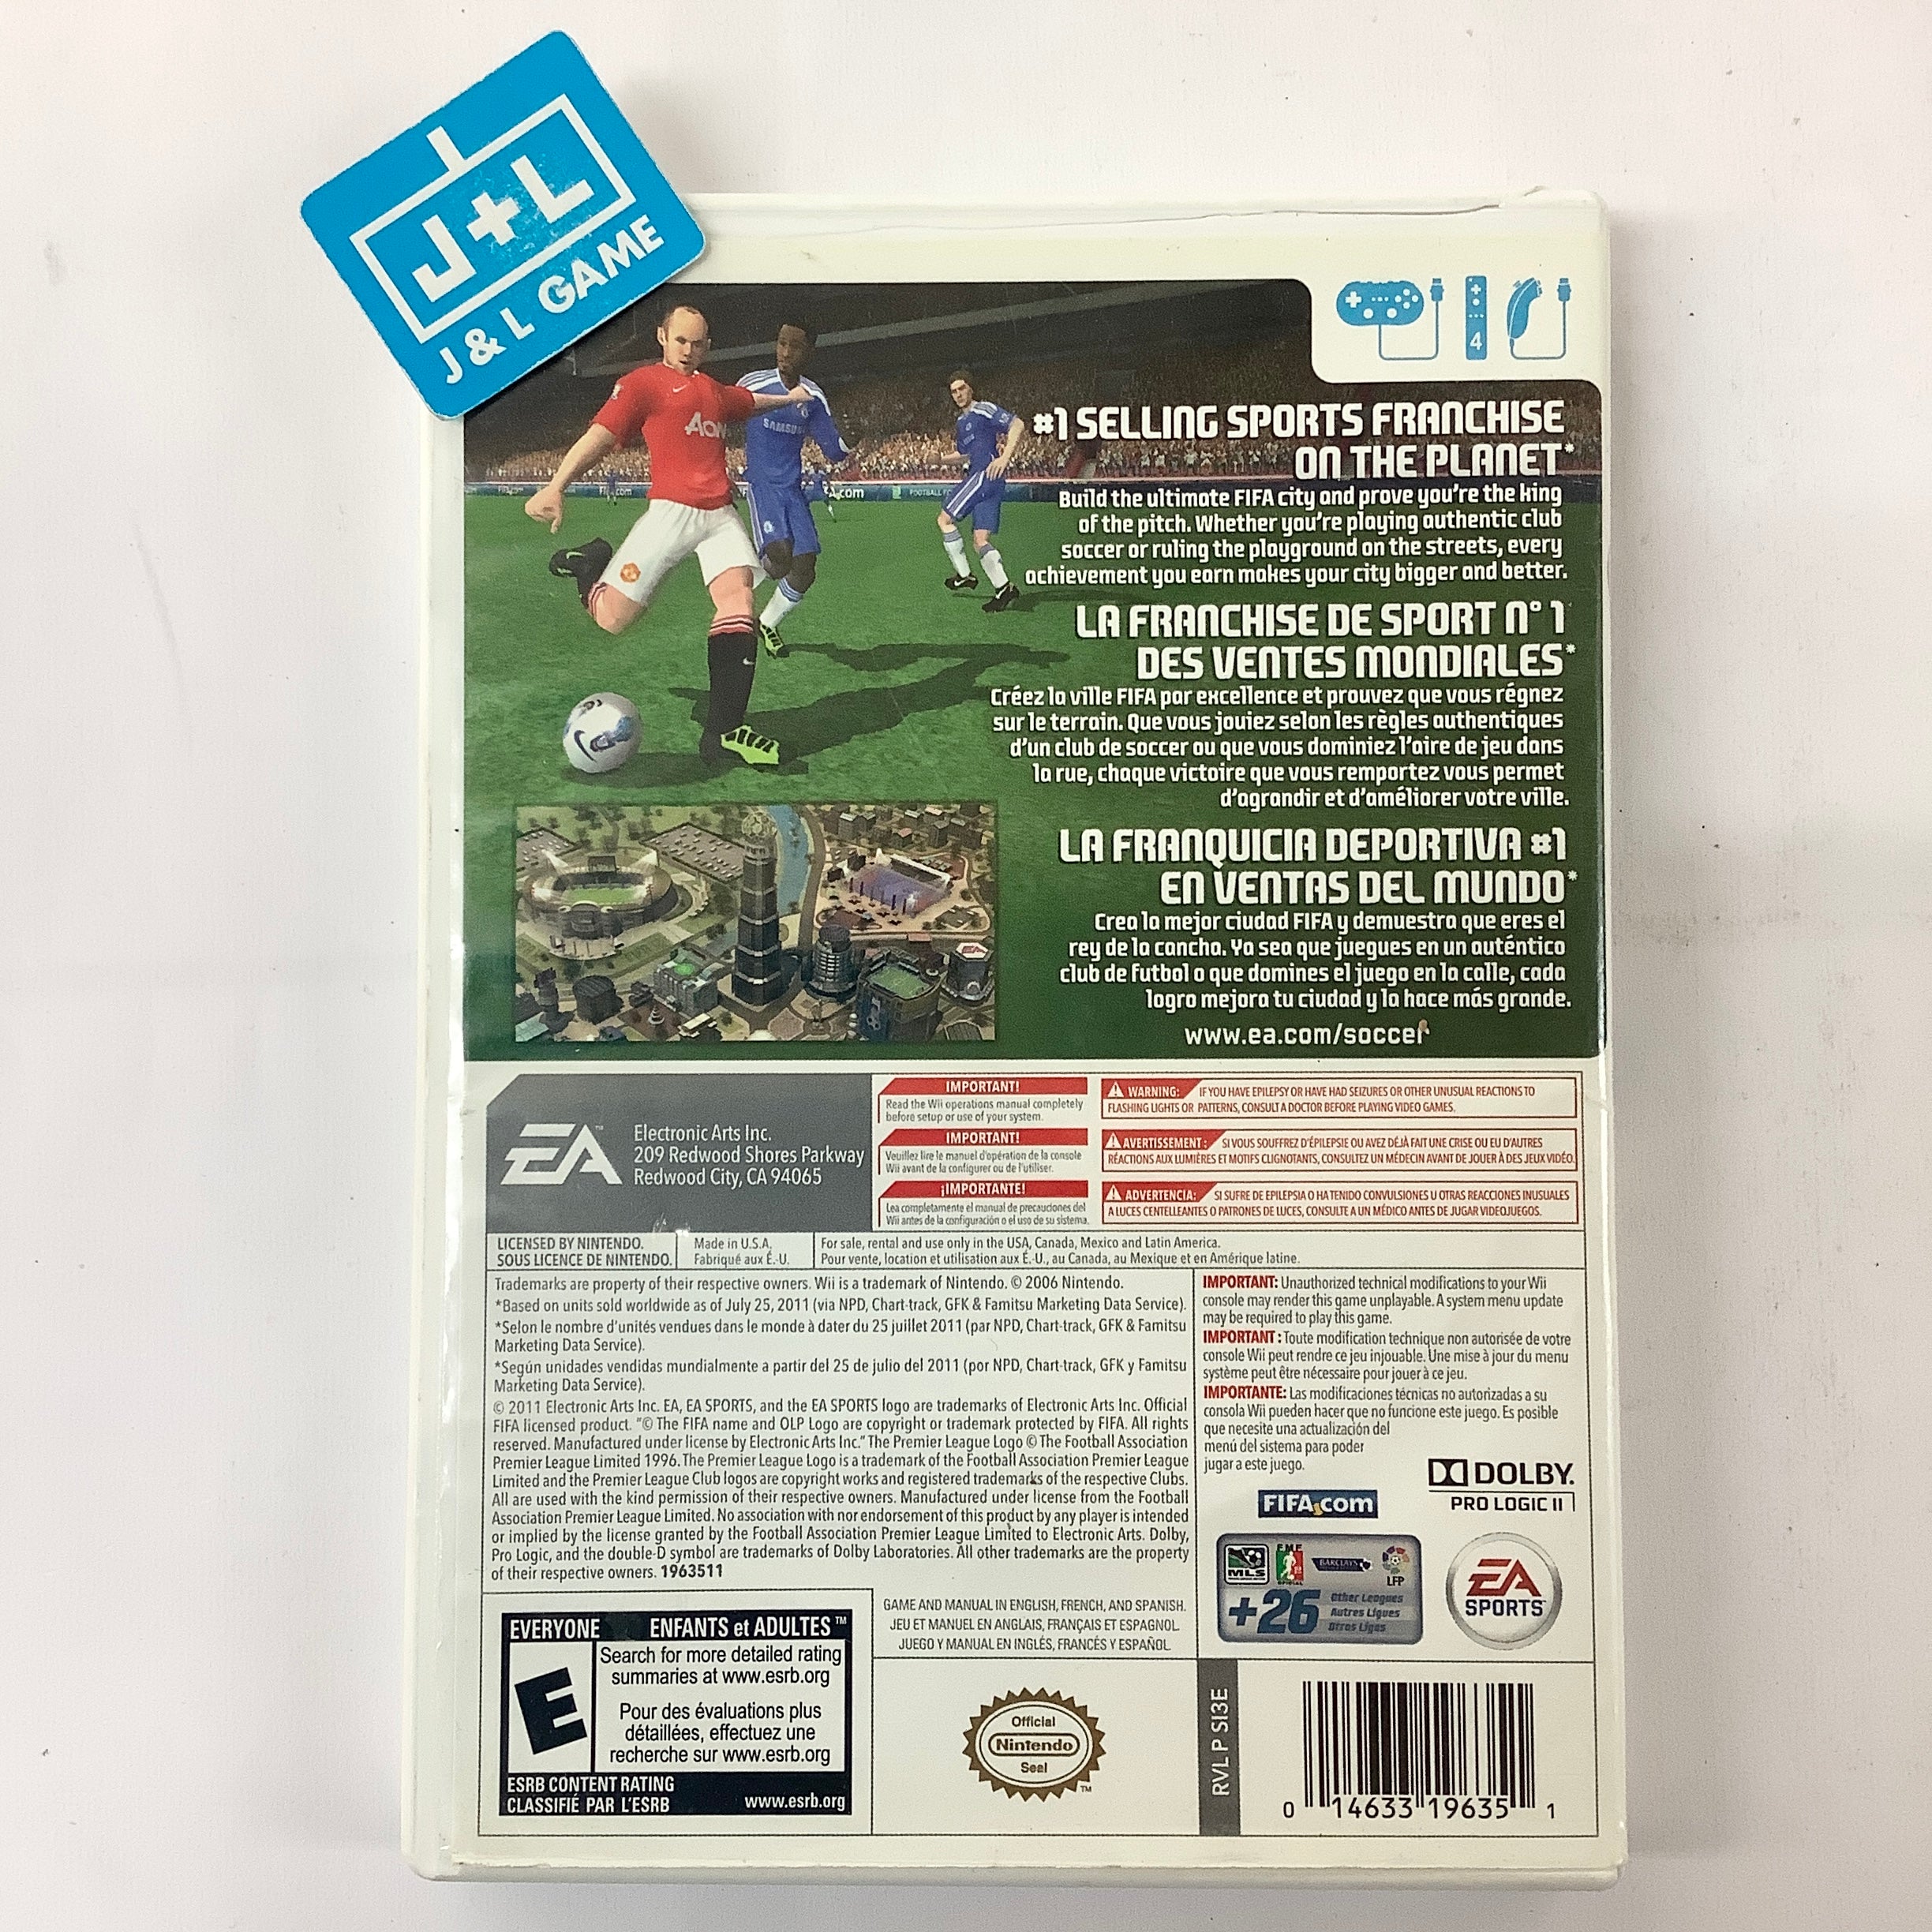 FIFA Soccer 12 - Nintendo Wii [Pre-Owned] Video Games Electronic Arts   